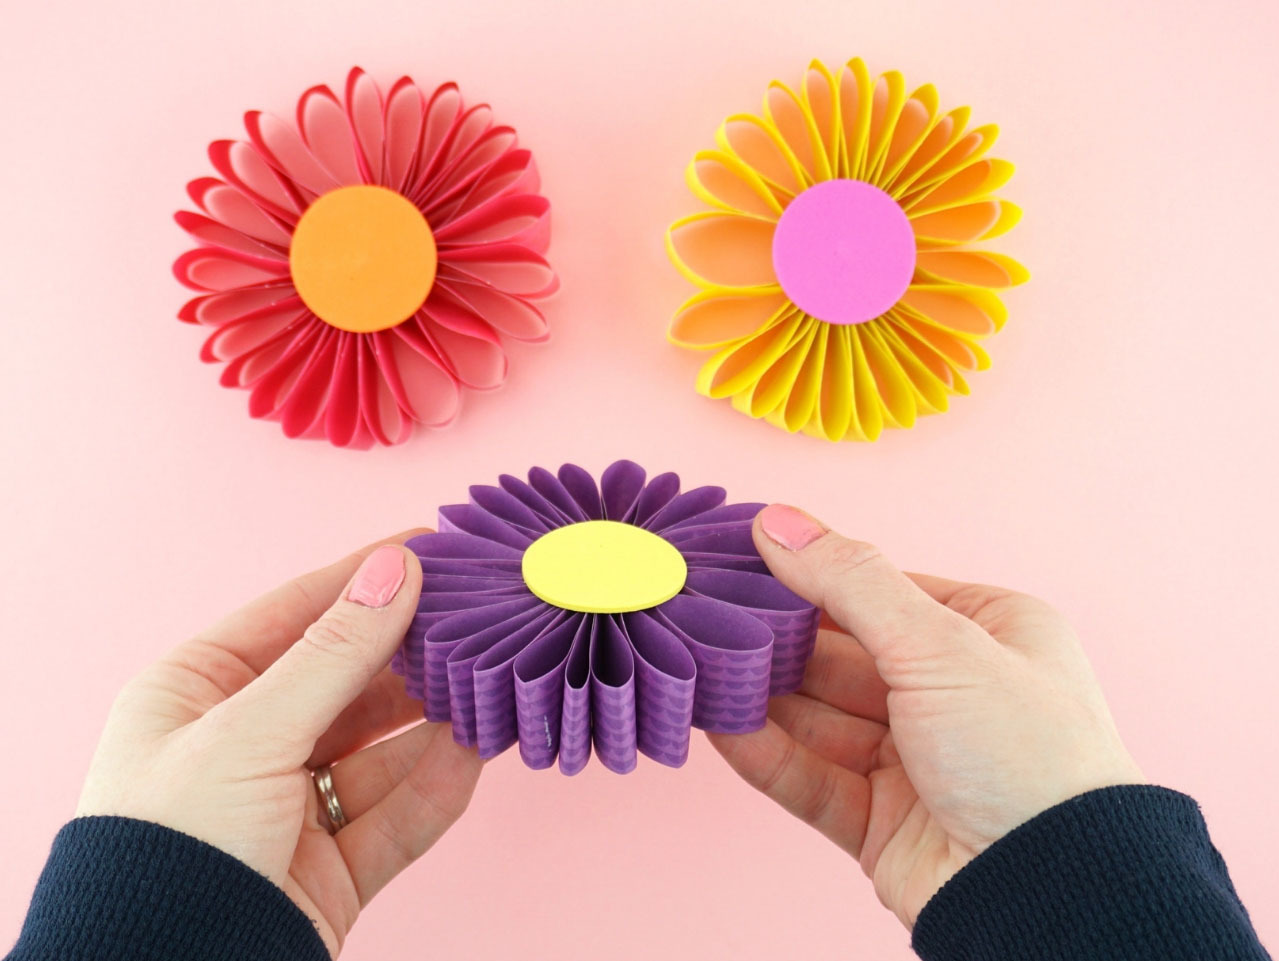 How to make simple paper roses and beautiful roses for Mothers Day